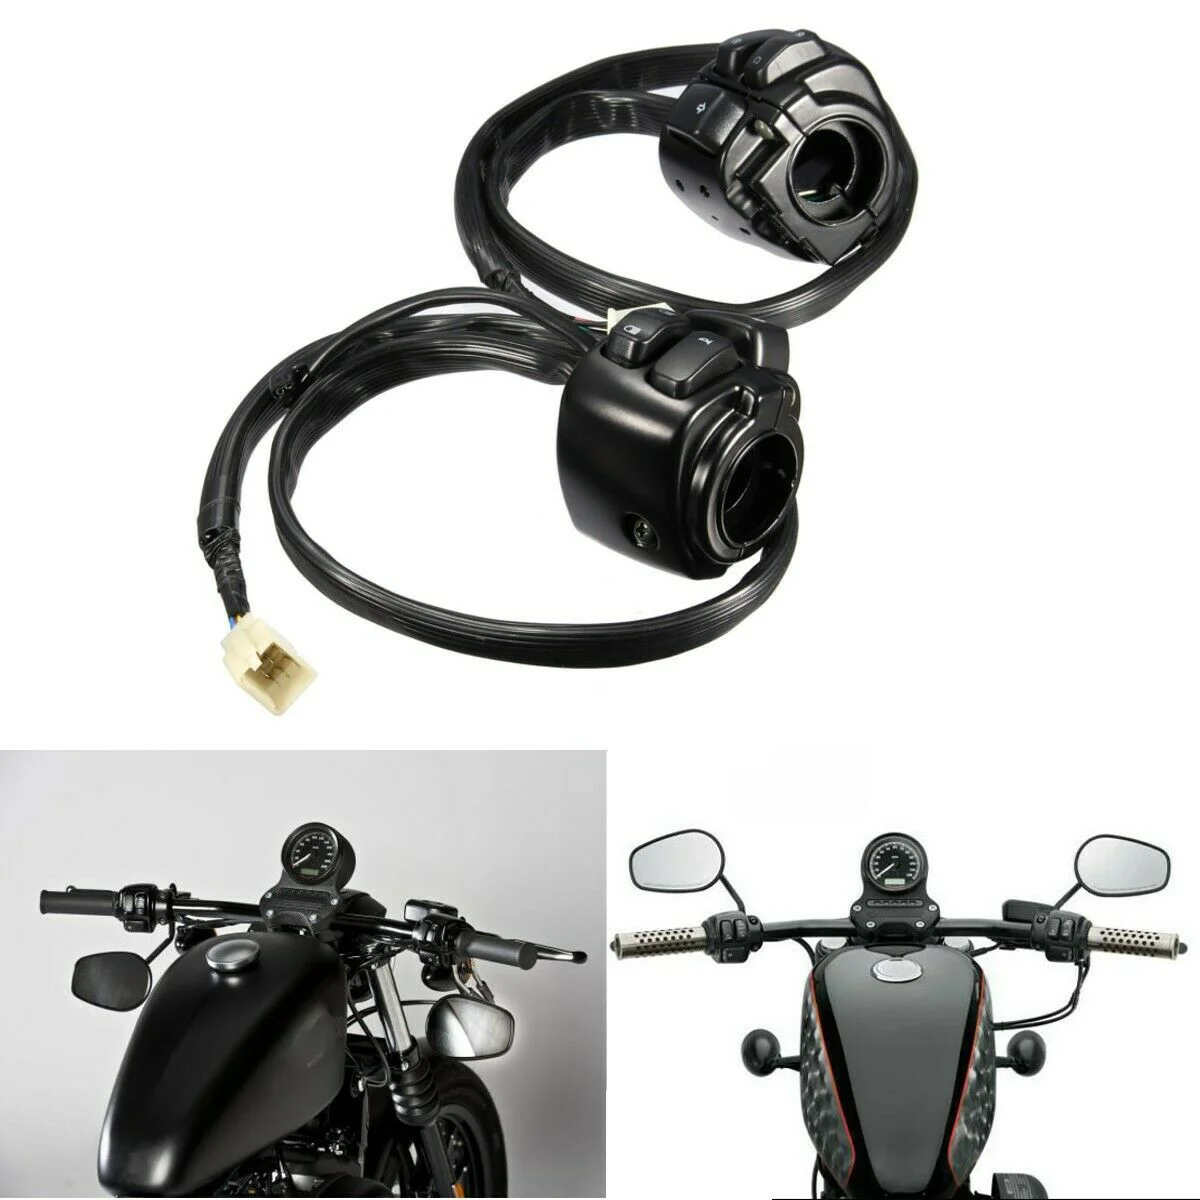 Pair Motorcycle 1" 25mm Handlebar Control Switch Turn Signal Horn For Harley Dyna Softail Sportster 883 1200 1996-2012 |